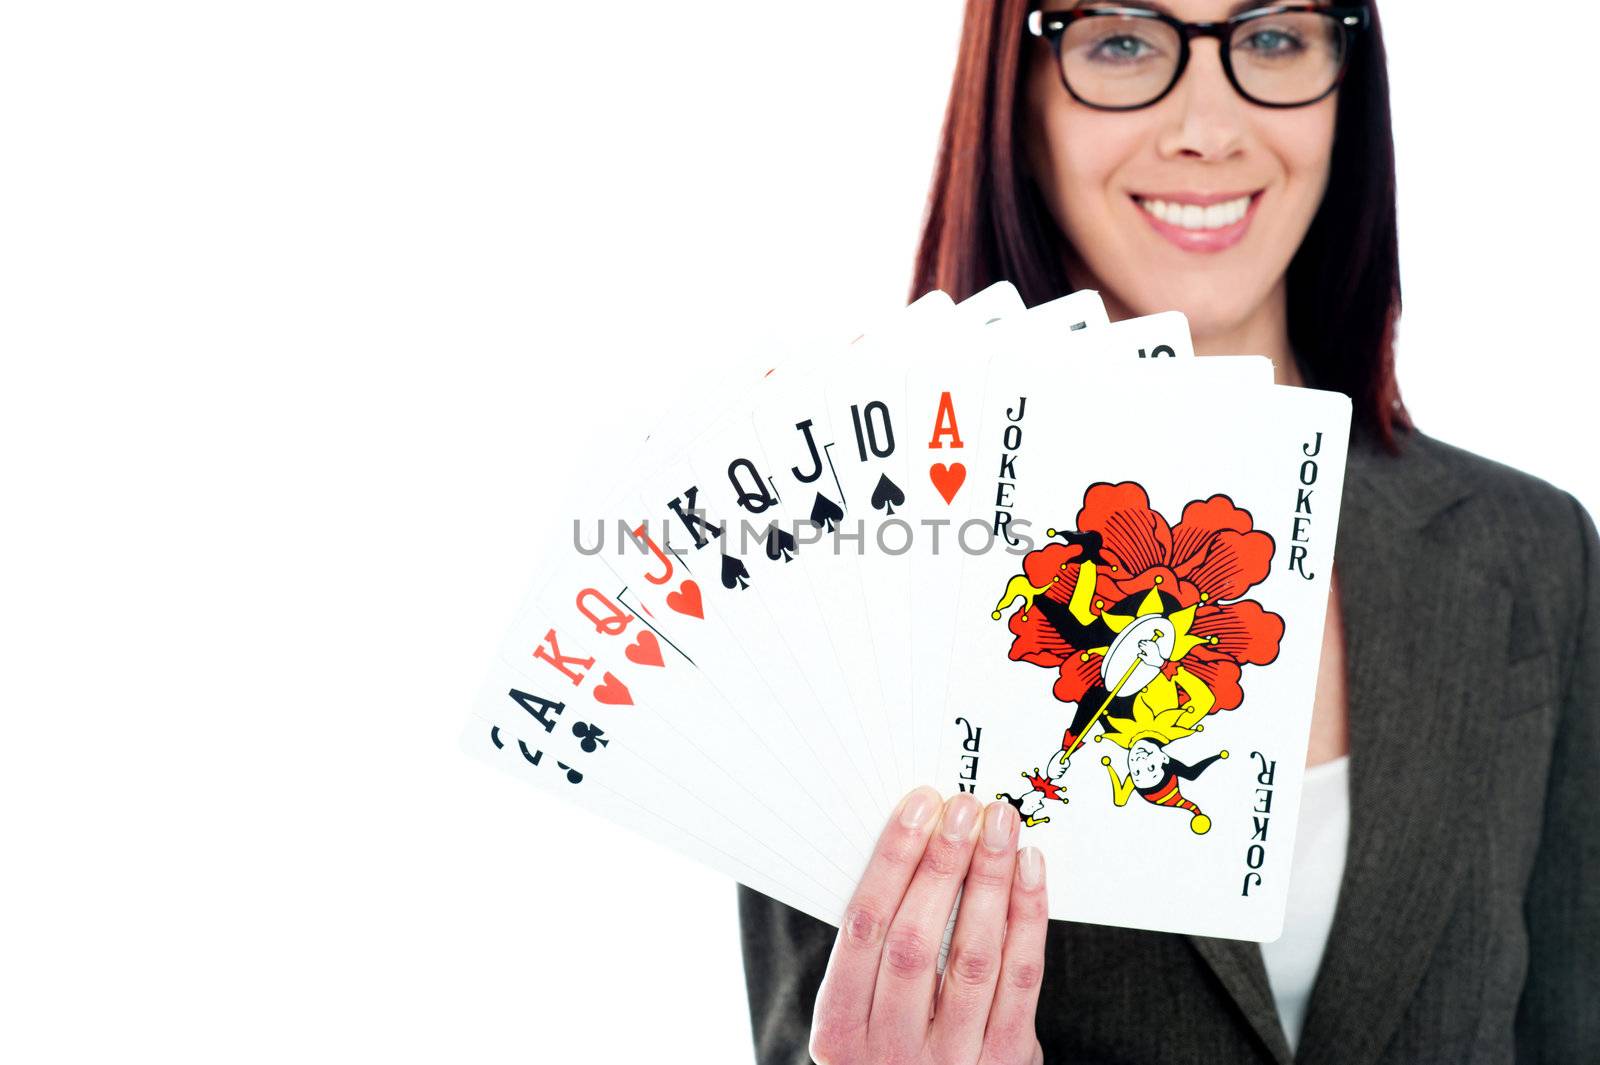 Charming businesswoman holding playing cards wearing glasses